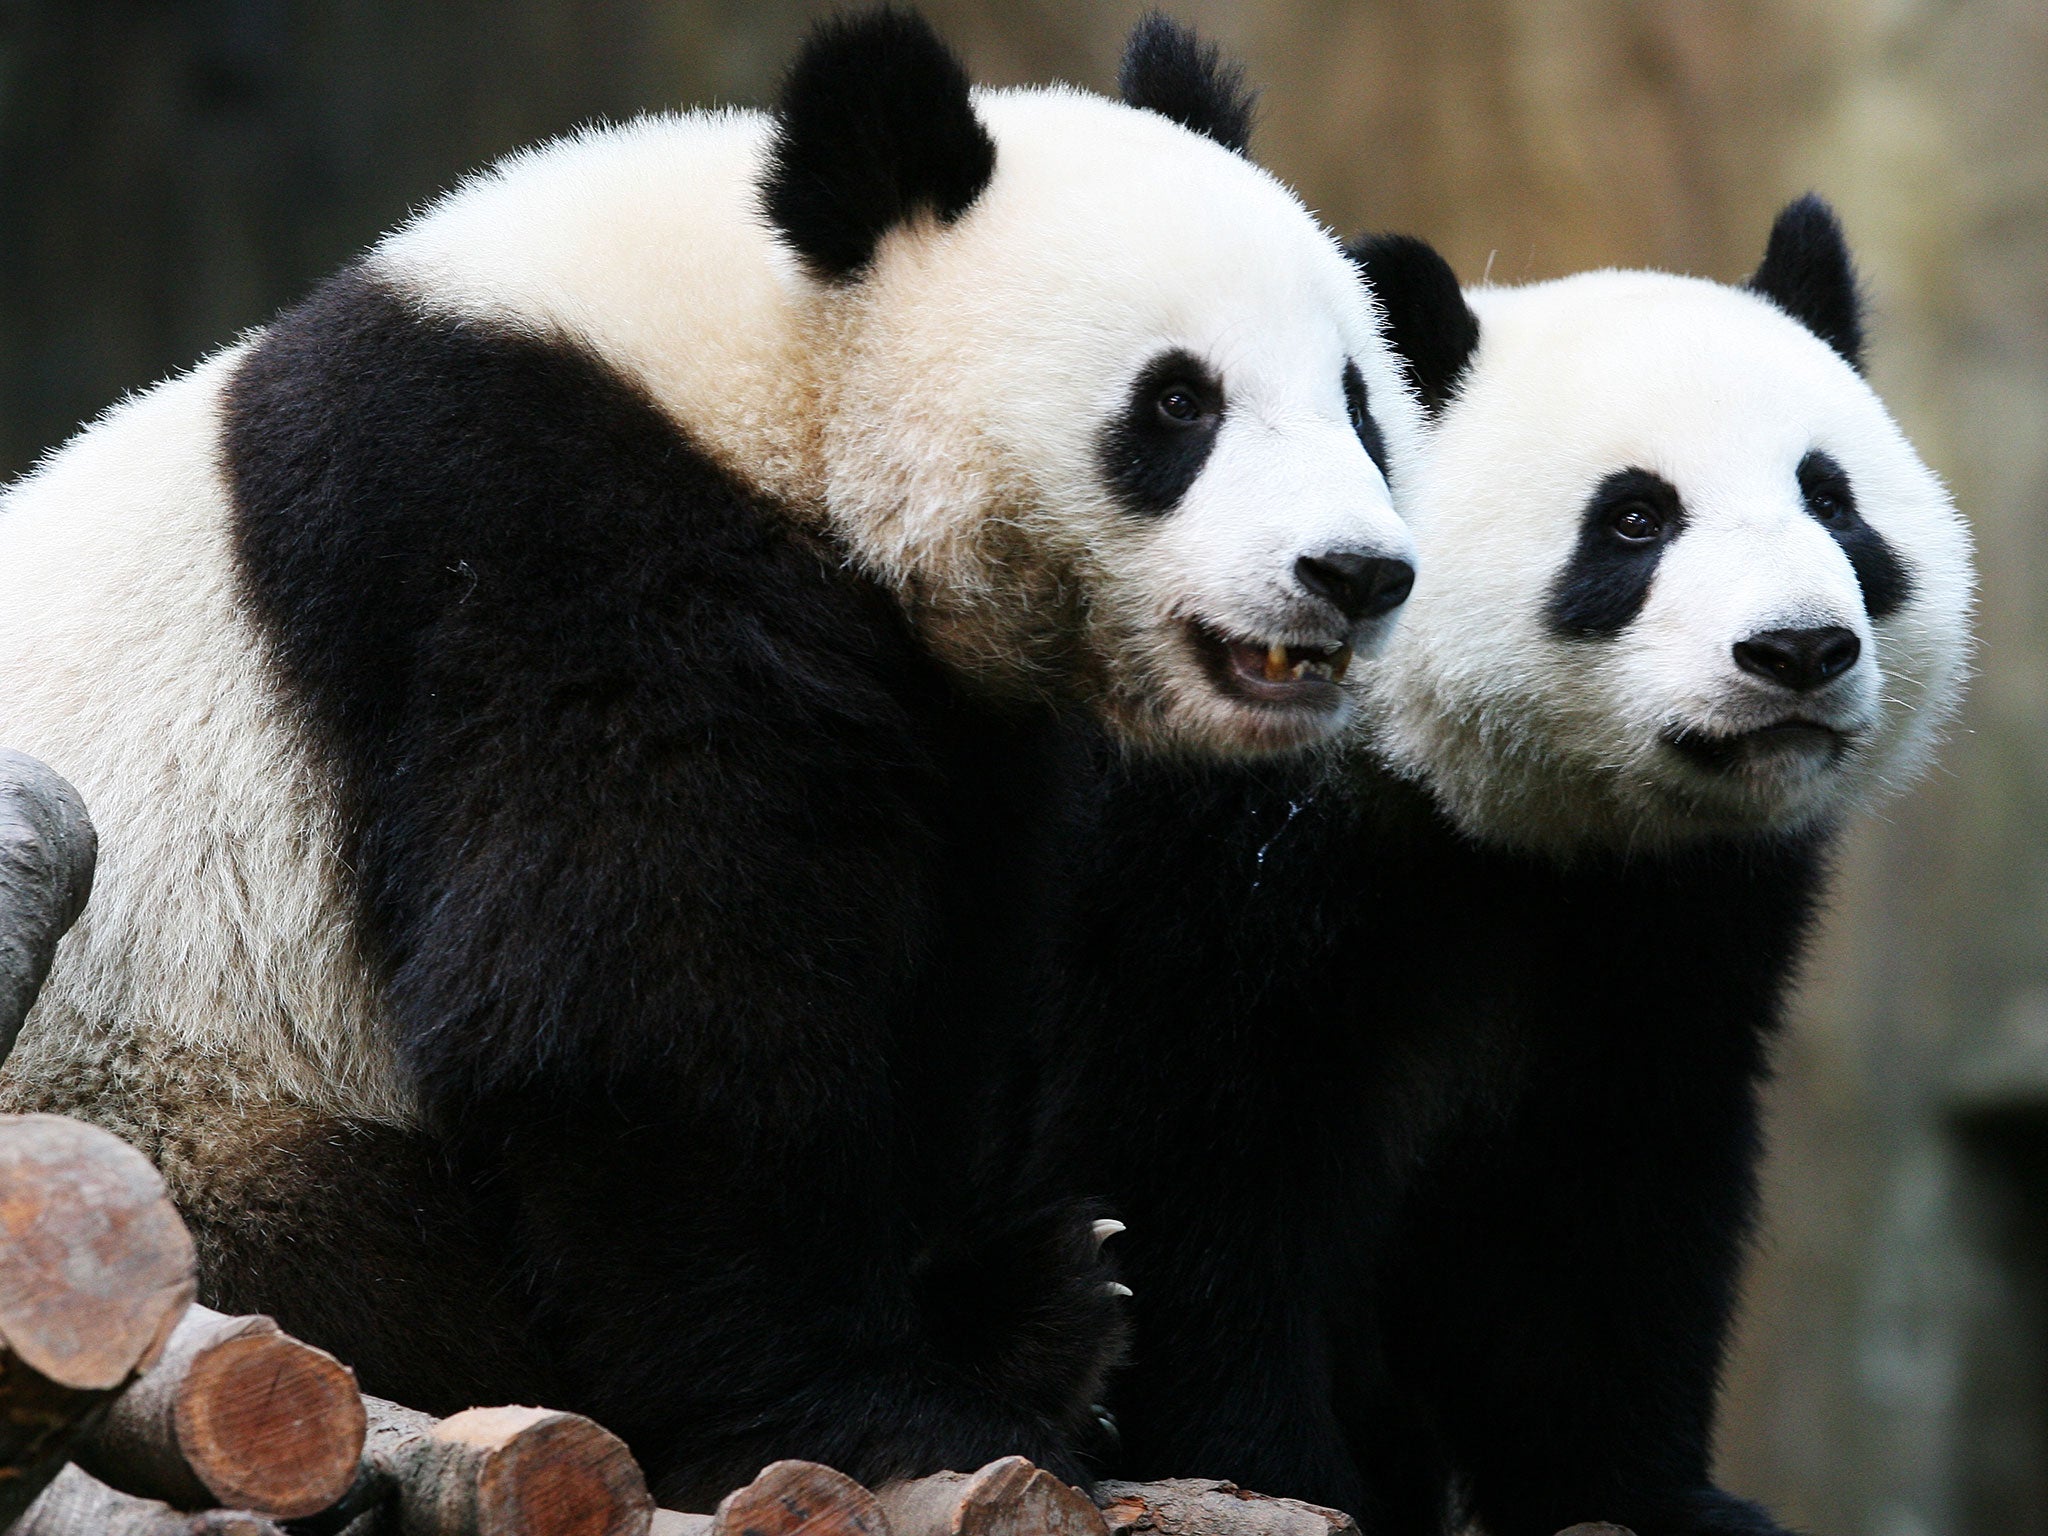 The giant panda has been taken off the 'endangered' list